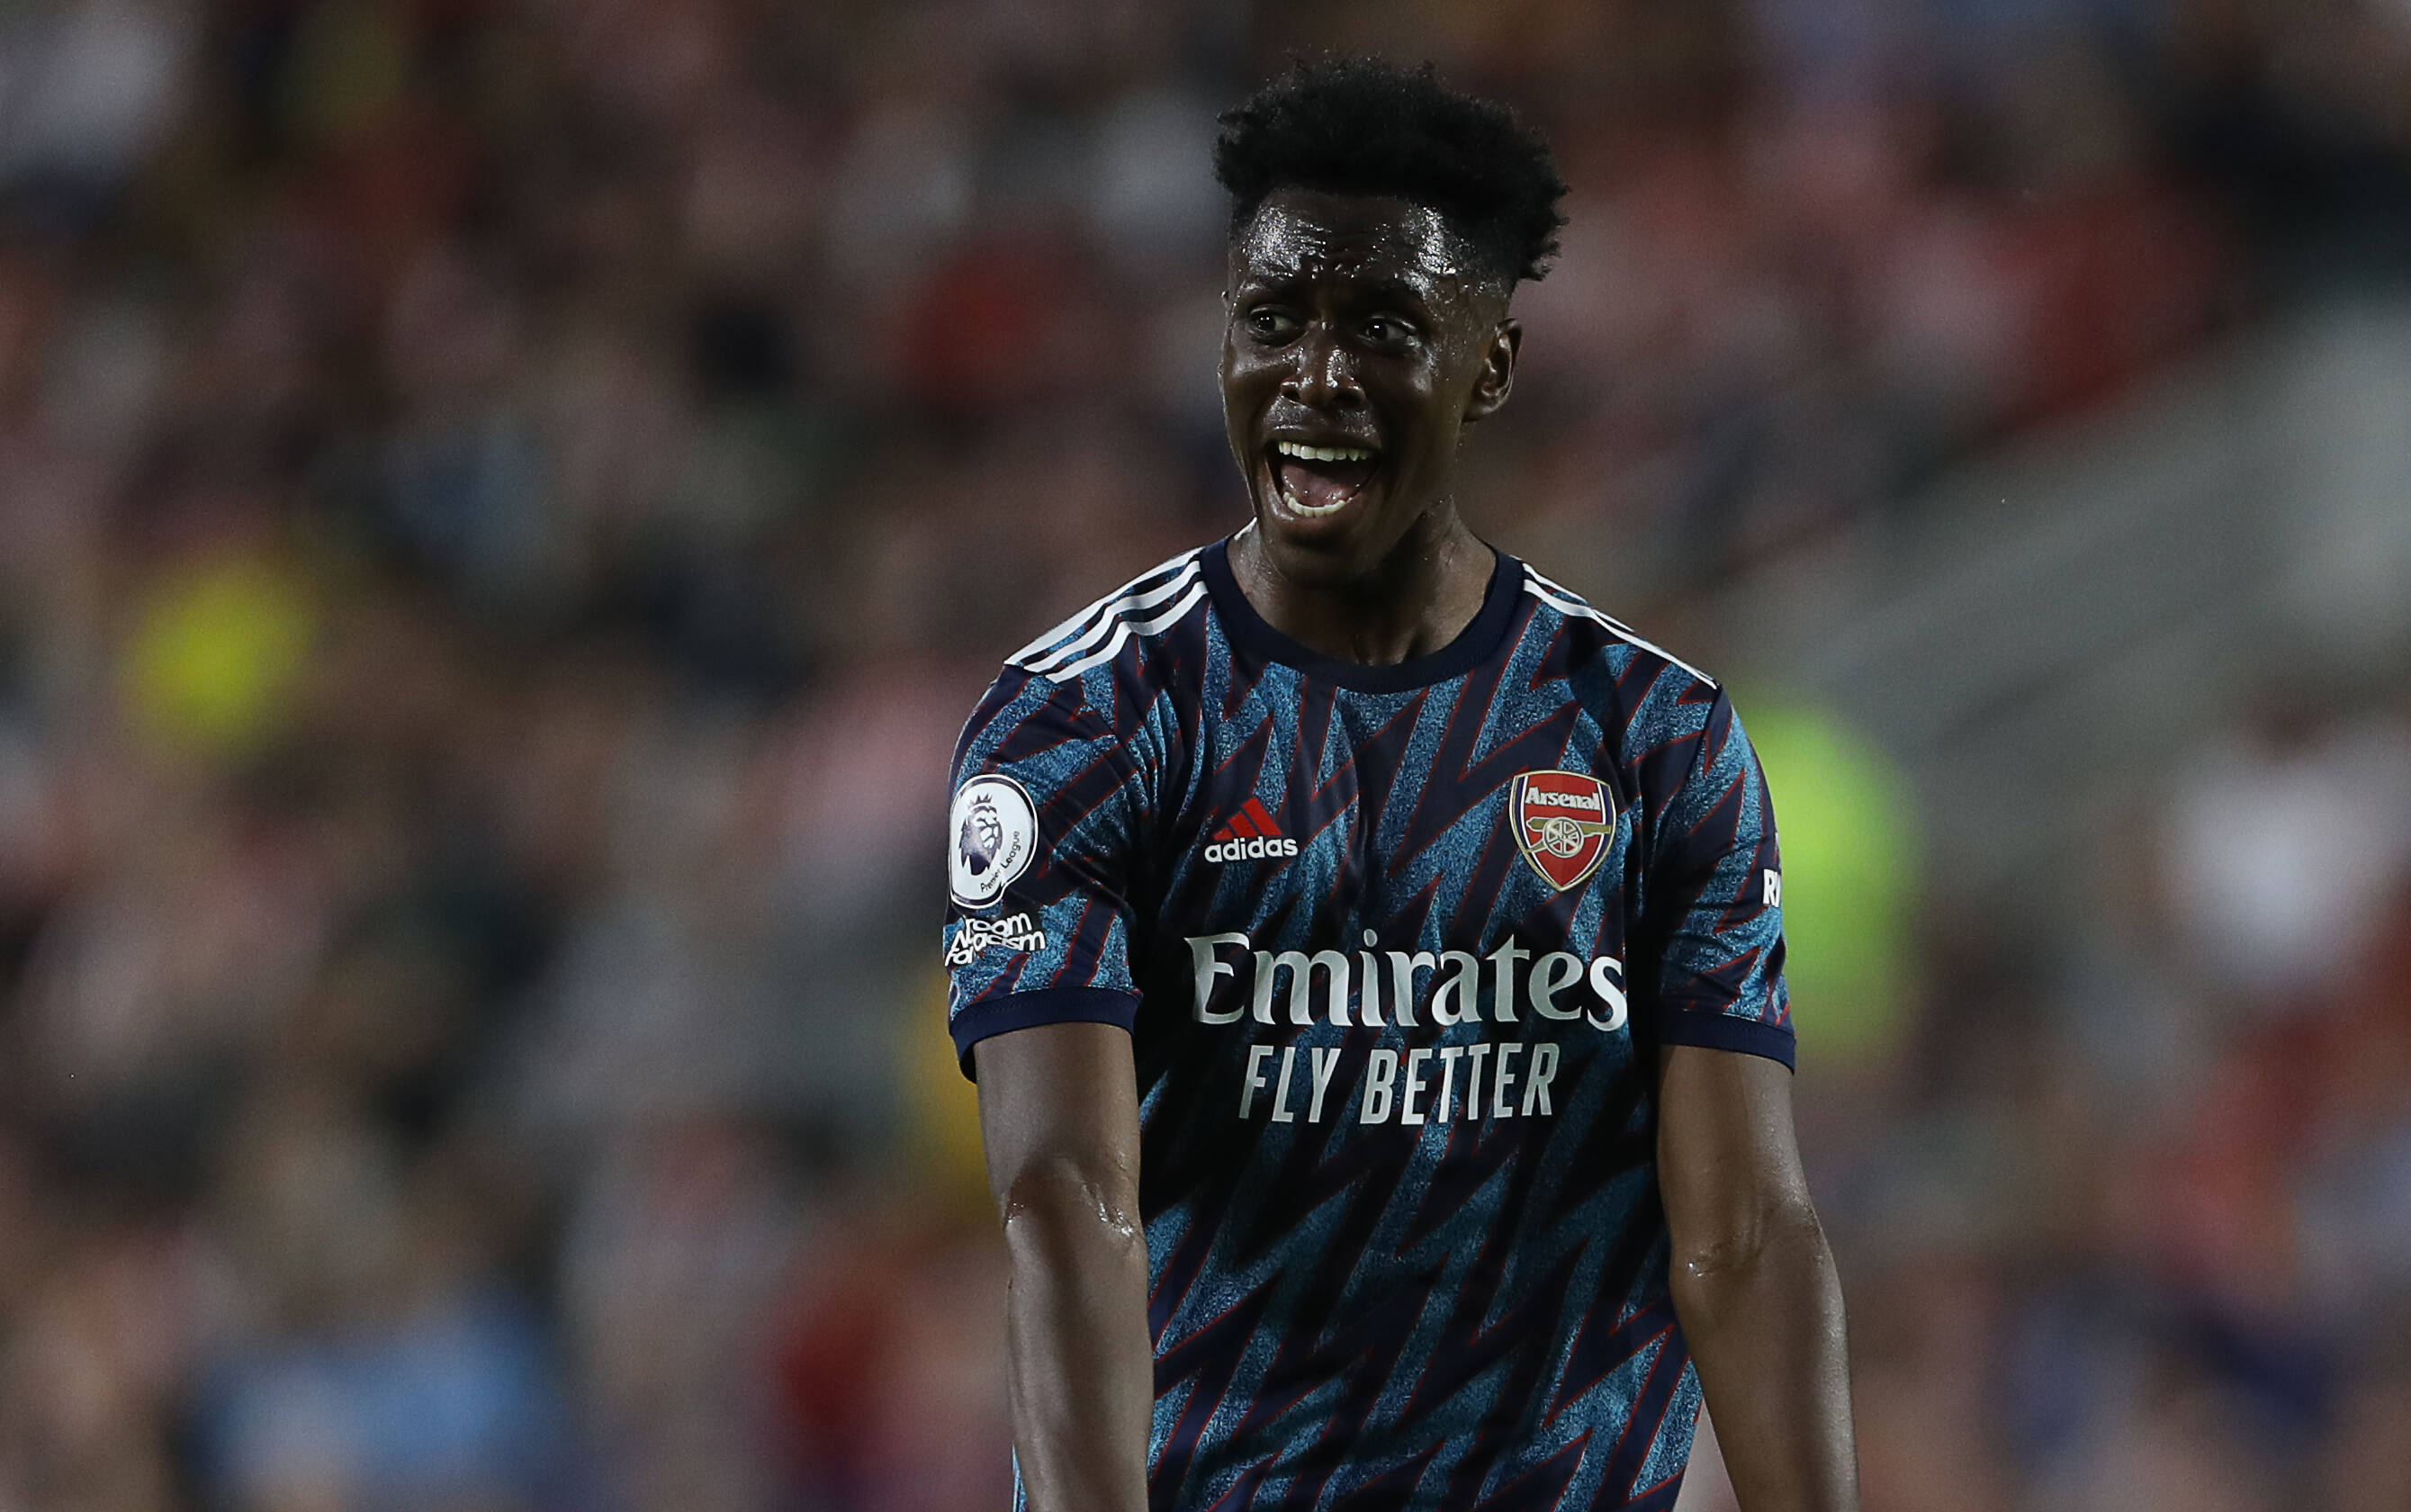 Arsenal in talks to loan out 23-year-old, deal could include buy option CaughtOffside